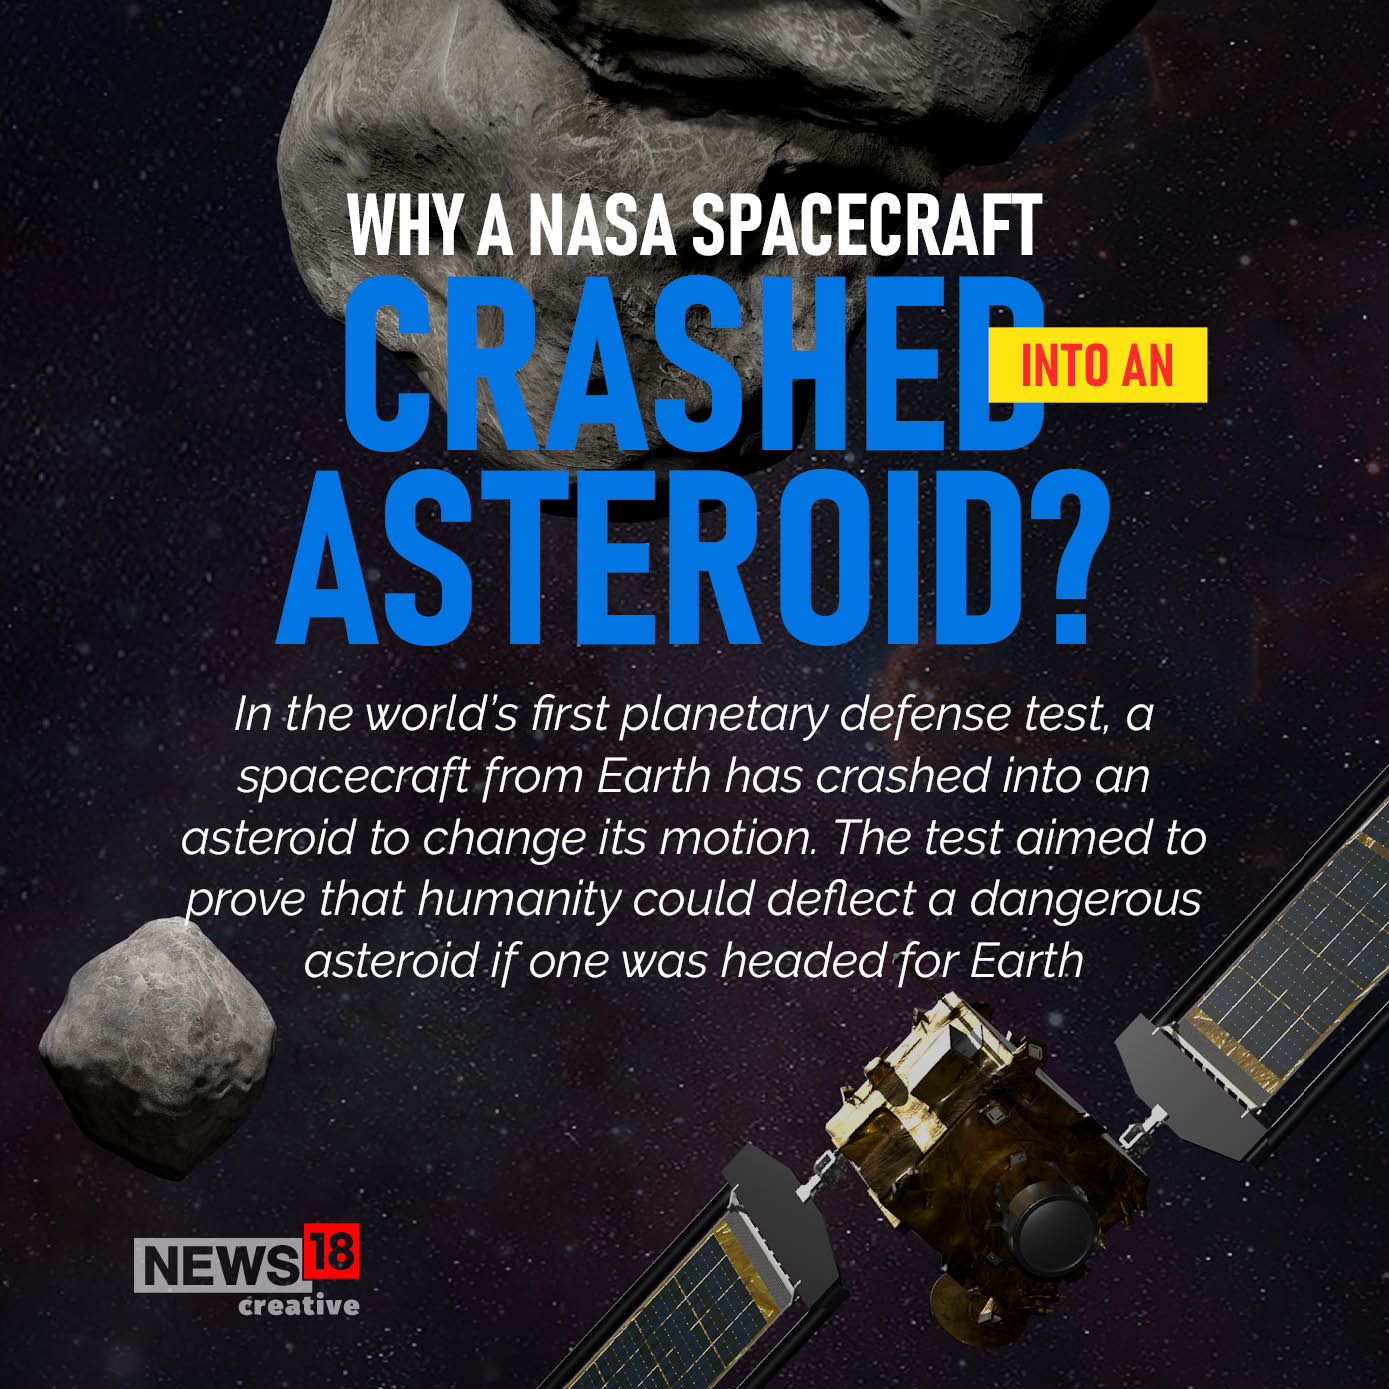 In GFX | Why NASA's DART Spacecraft Crashed into Asteroid in 'Pathbreaking' Mission - News18